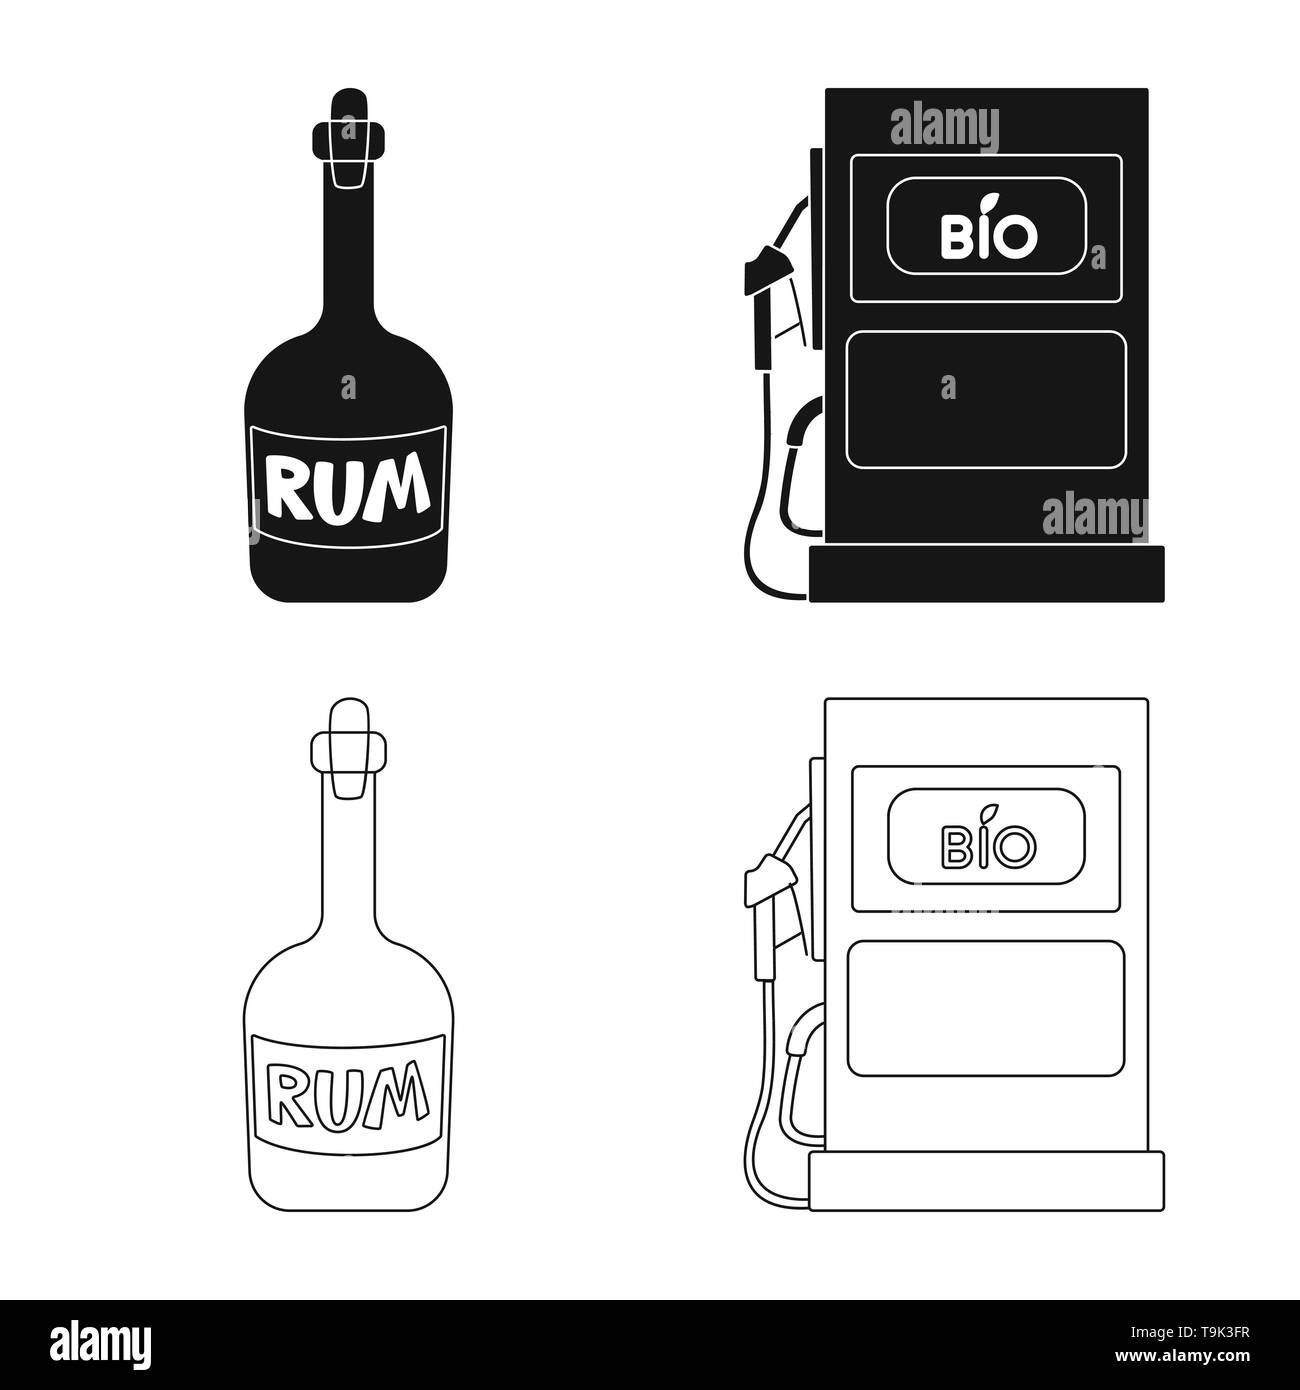 rum,petrol,bottle,nozzle,alcohol,fuel,glass,bio,bung,oil,pirate,organic,drink,station,vintag,pump,capacity,eco,bar,green,farm,agriculture,sucrose,technology,sugarcane,cane,sugar,field,plant,plantation,set,vector,icon,illustration,isolated,collection,design,element,graphic,sign, Vector Vectors , Stock Vector